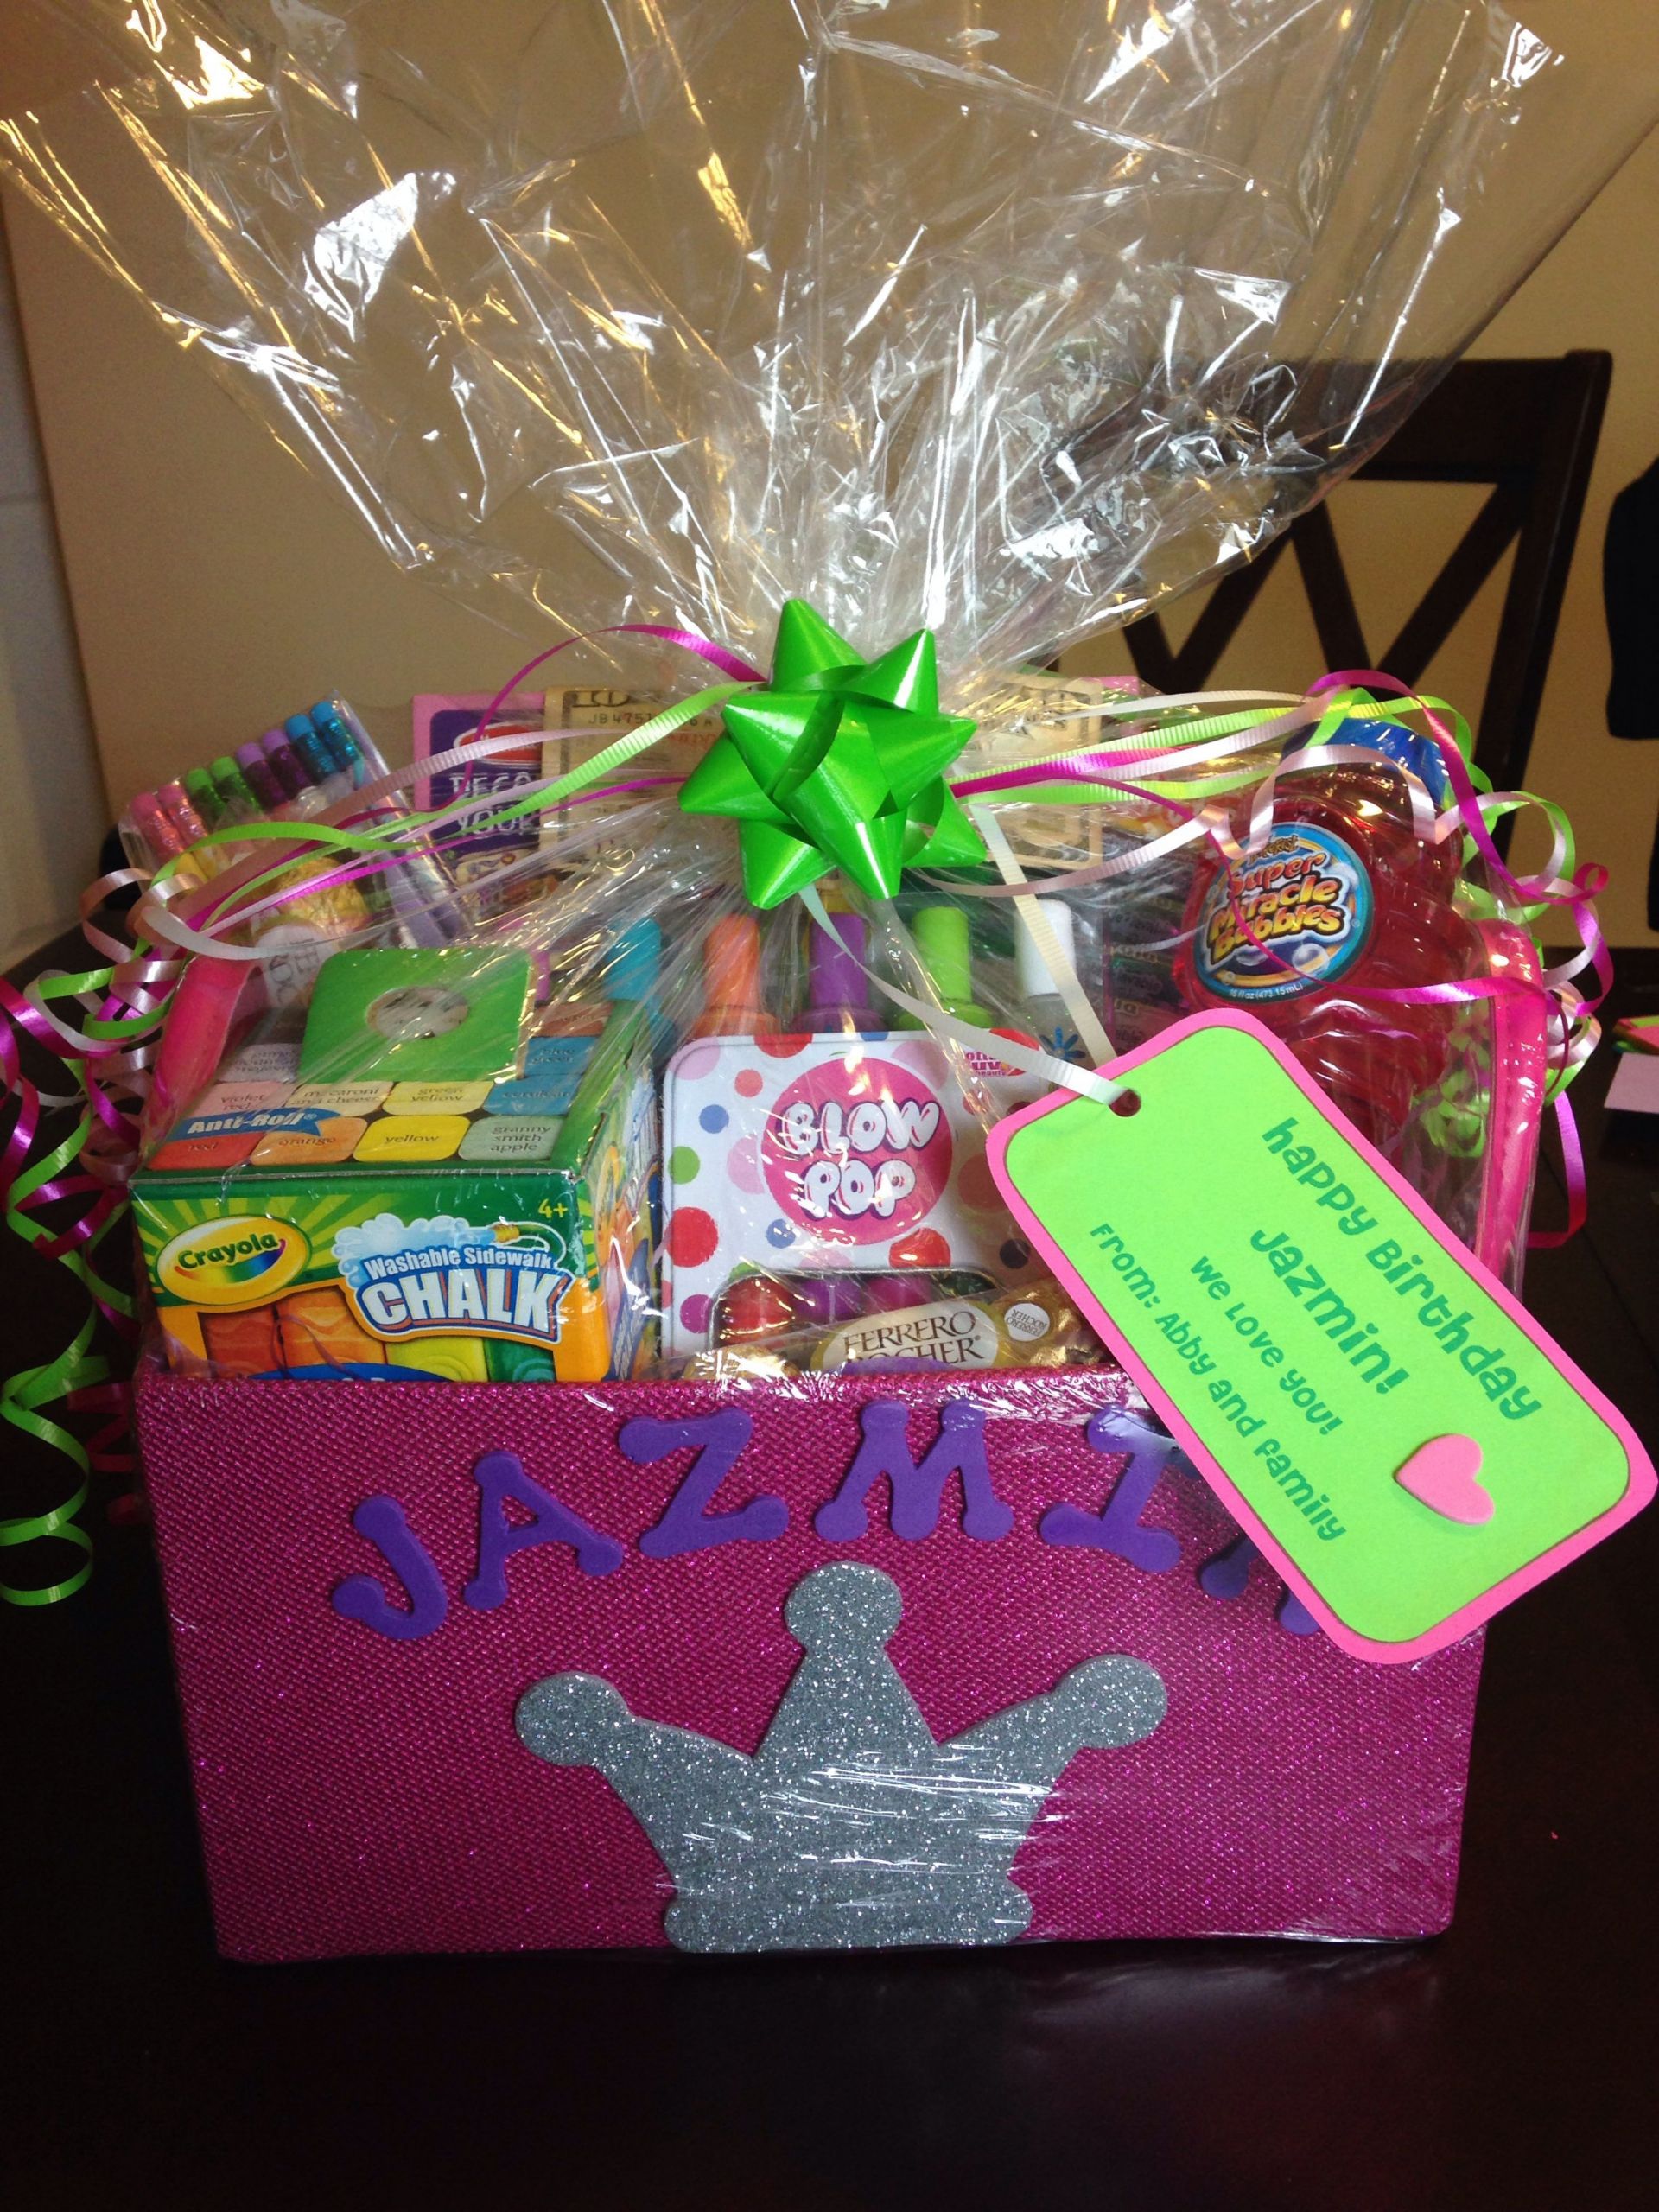 Birthday Return Gift Ideas For 8 Year Old
 Gift basket I made for 8 year old girl